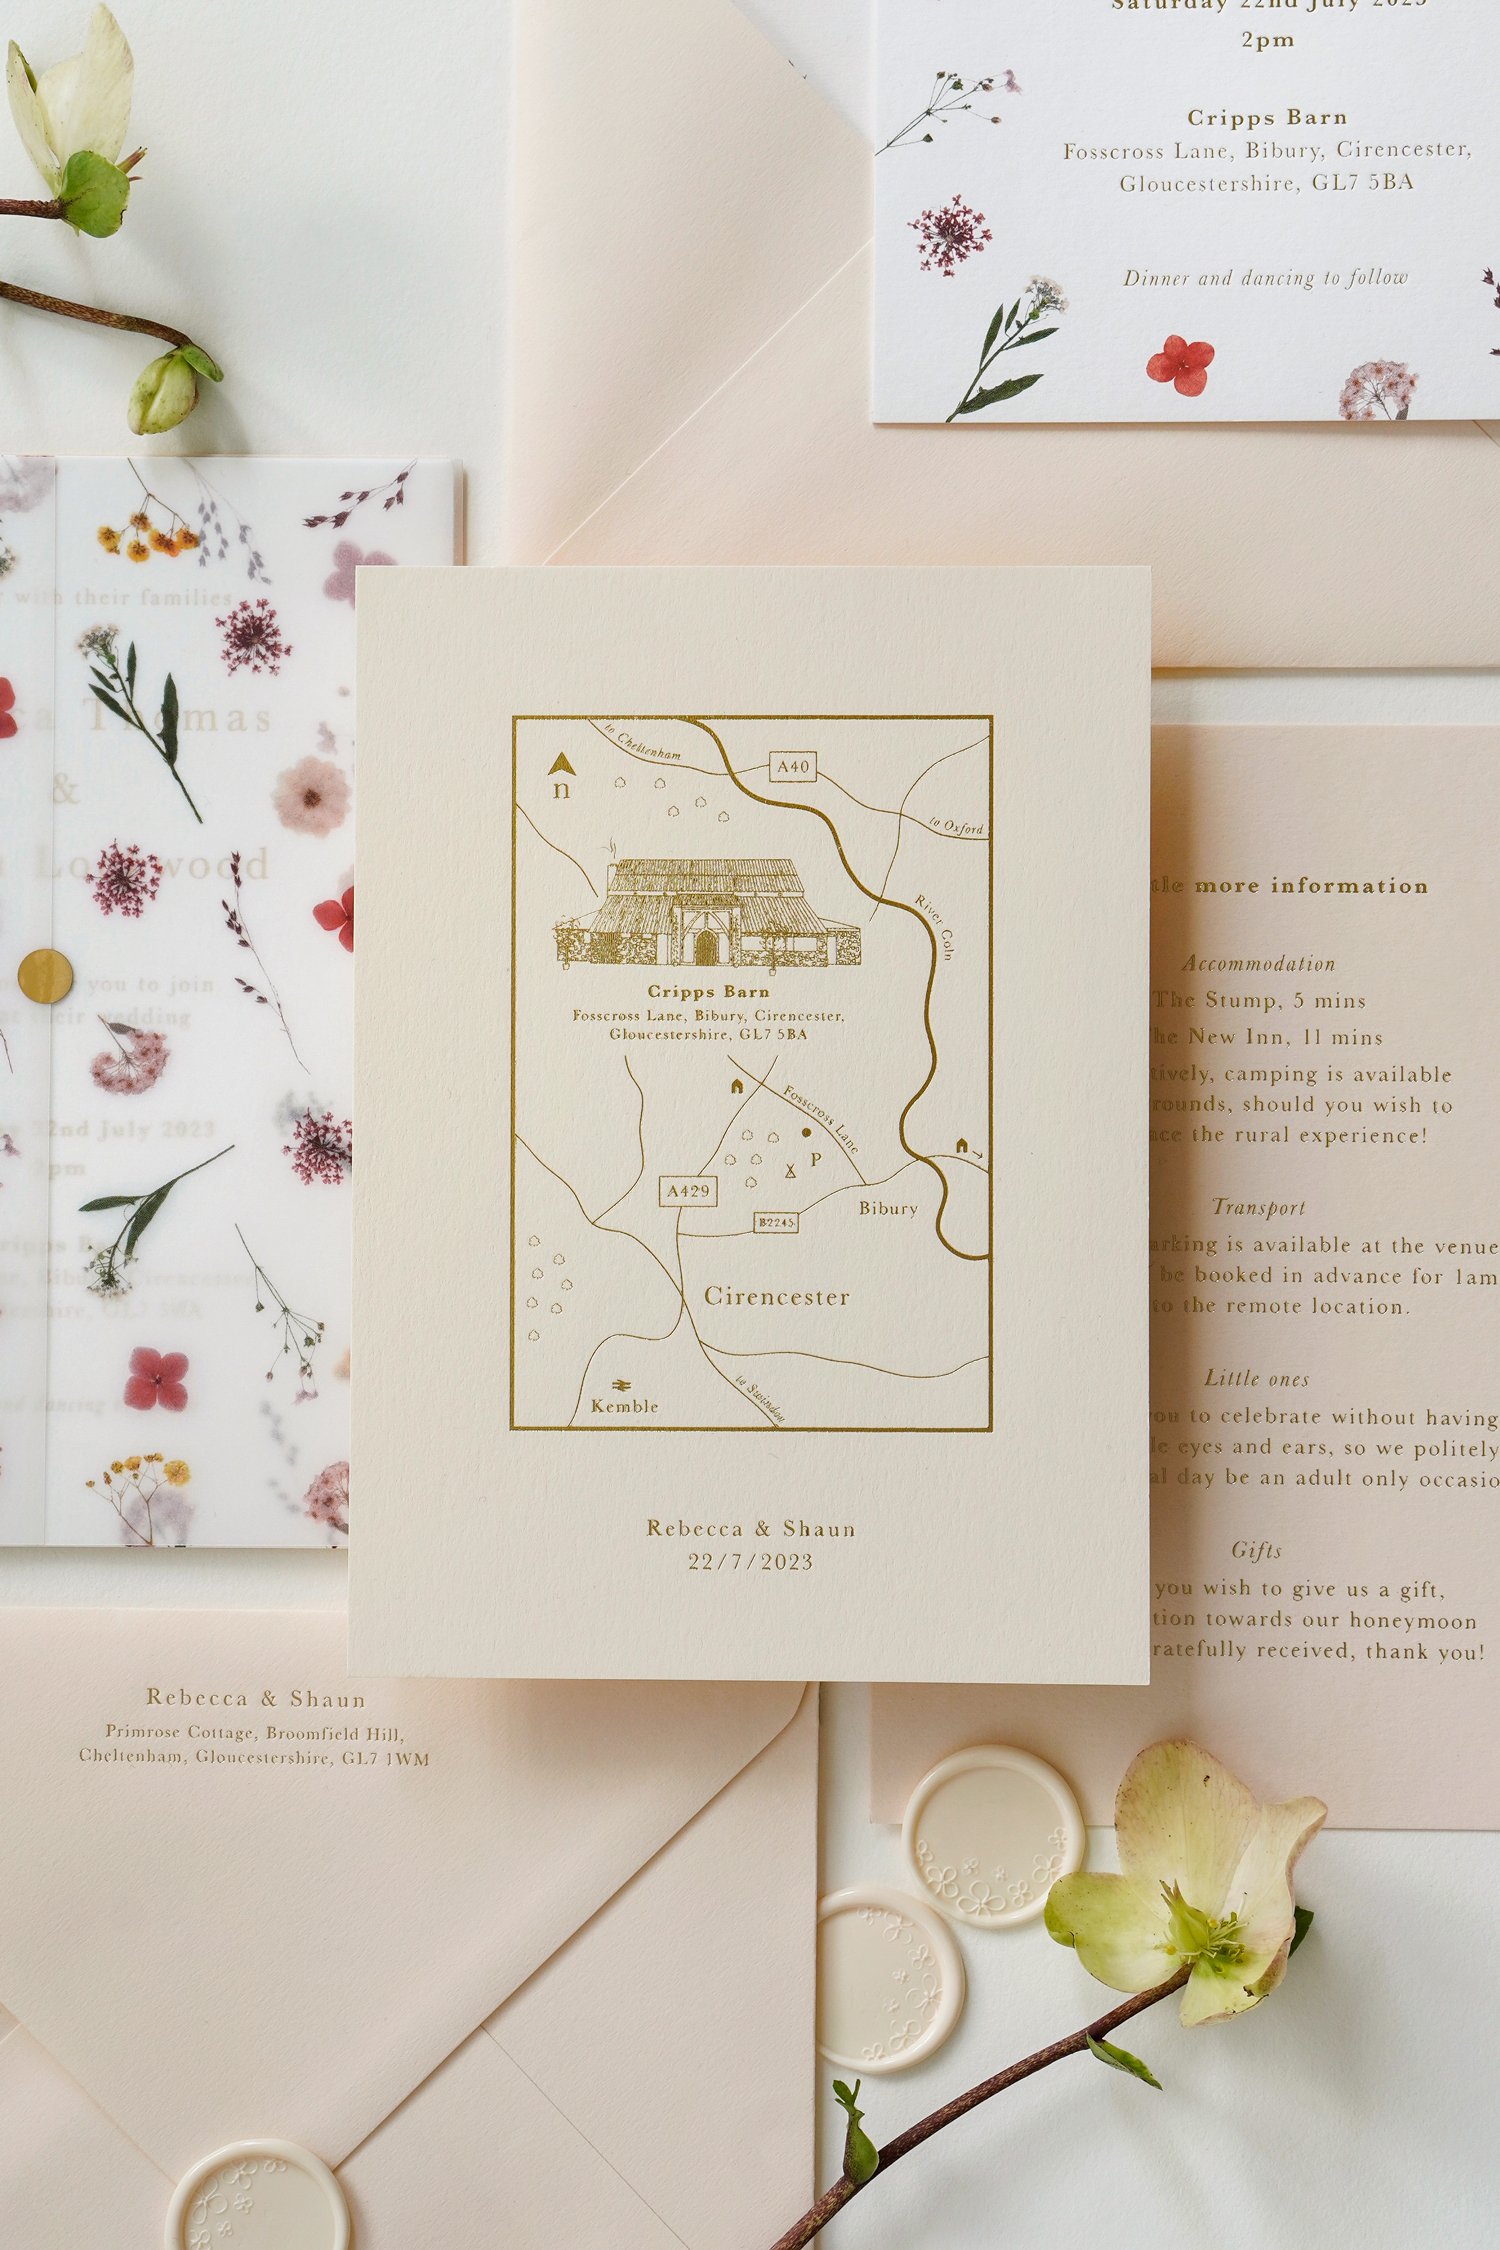 A bespoke illustrated map card